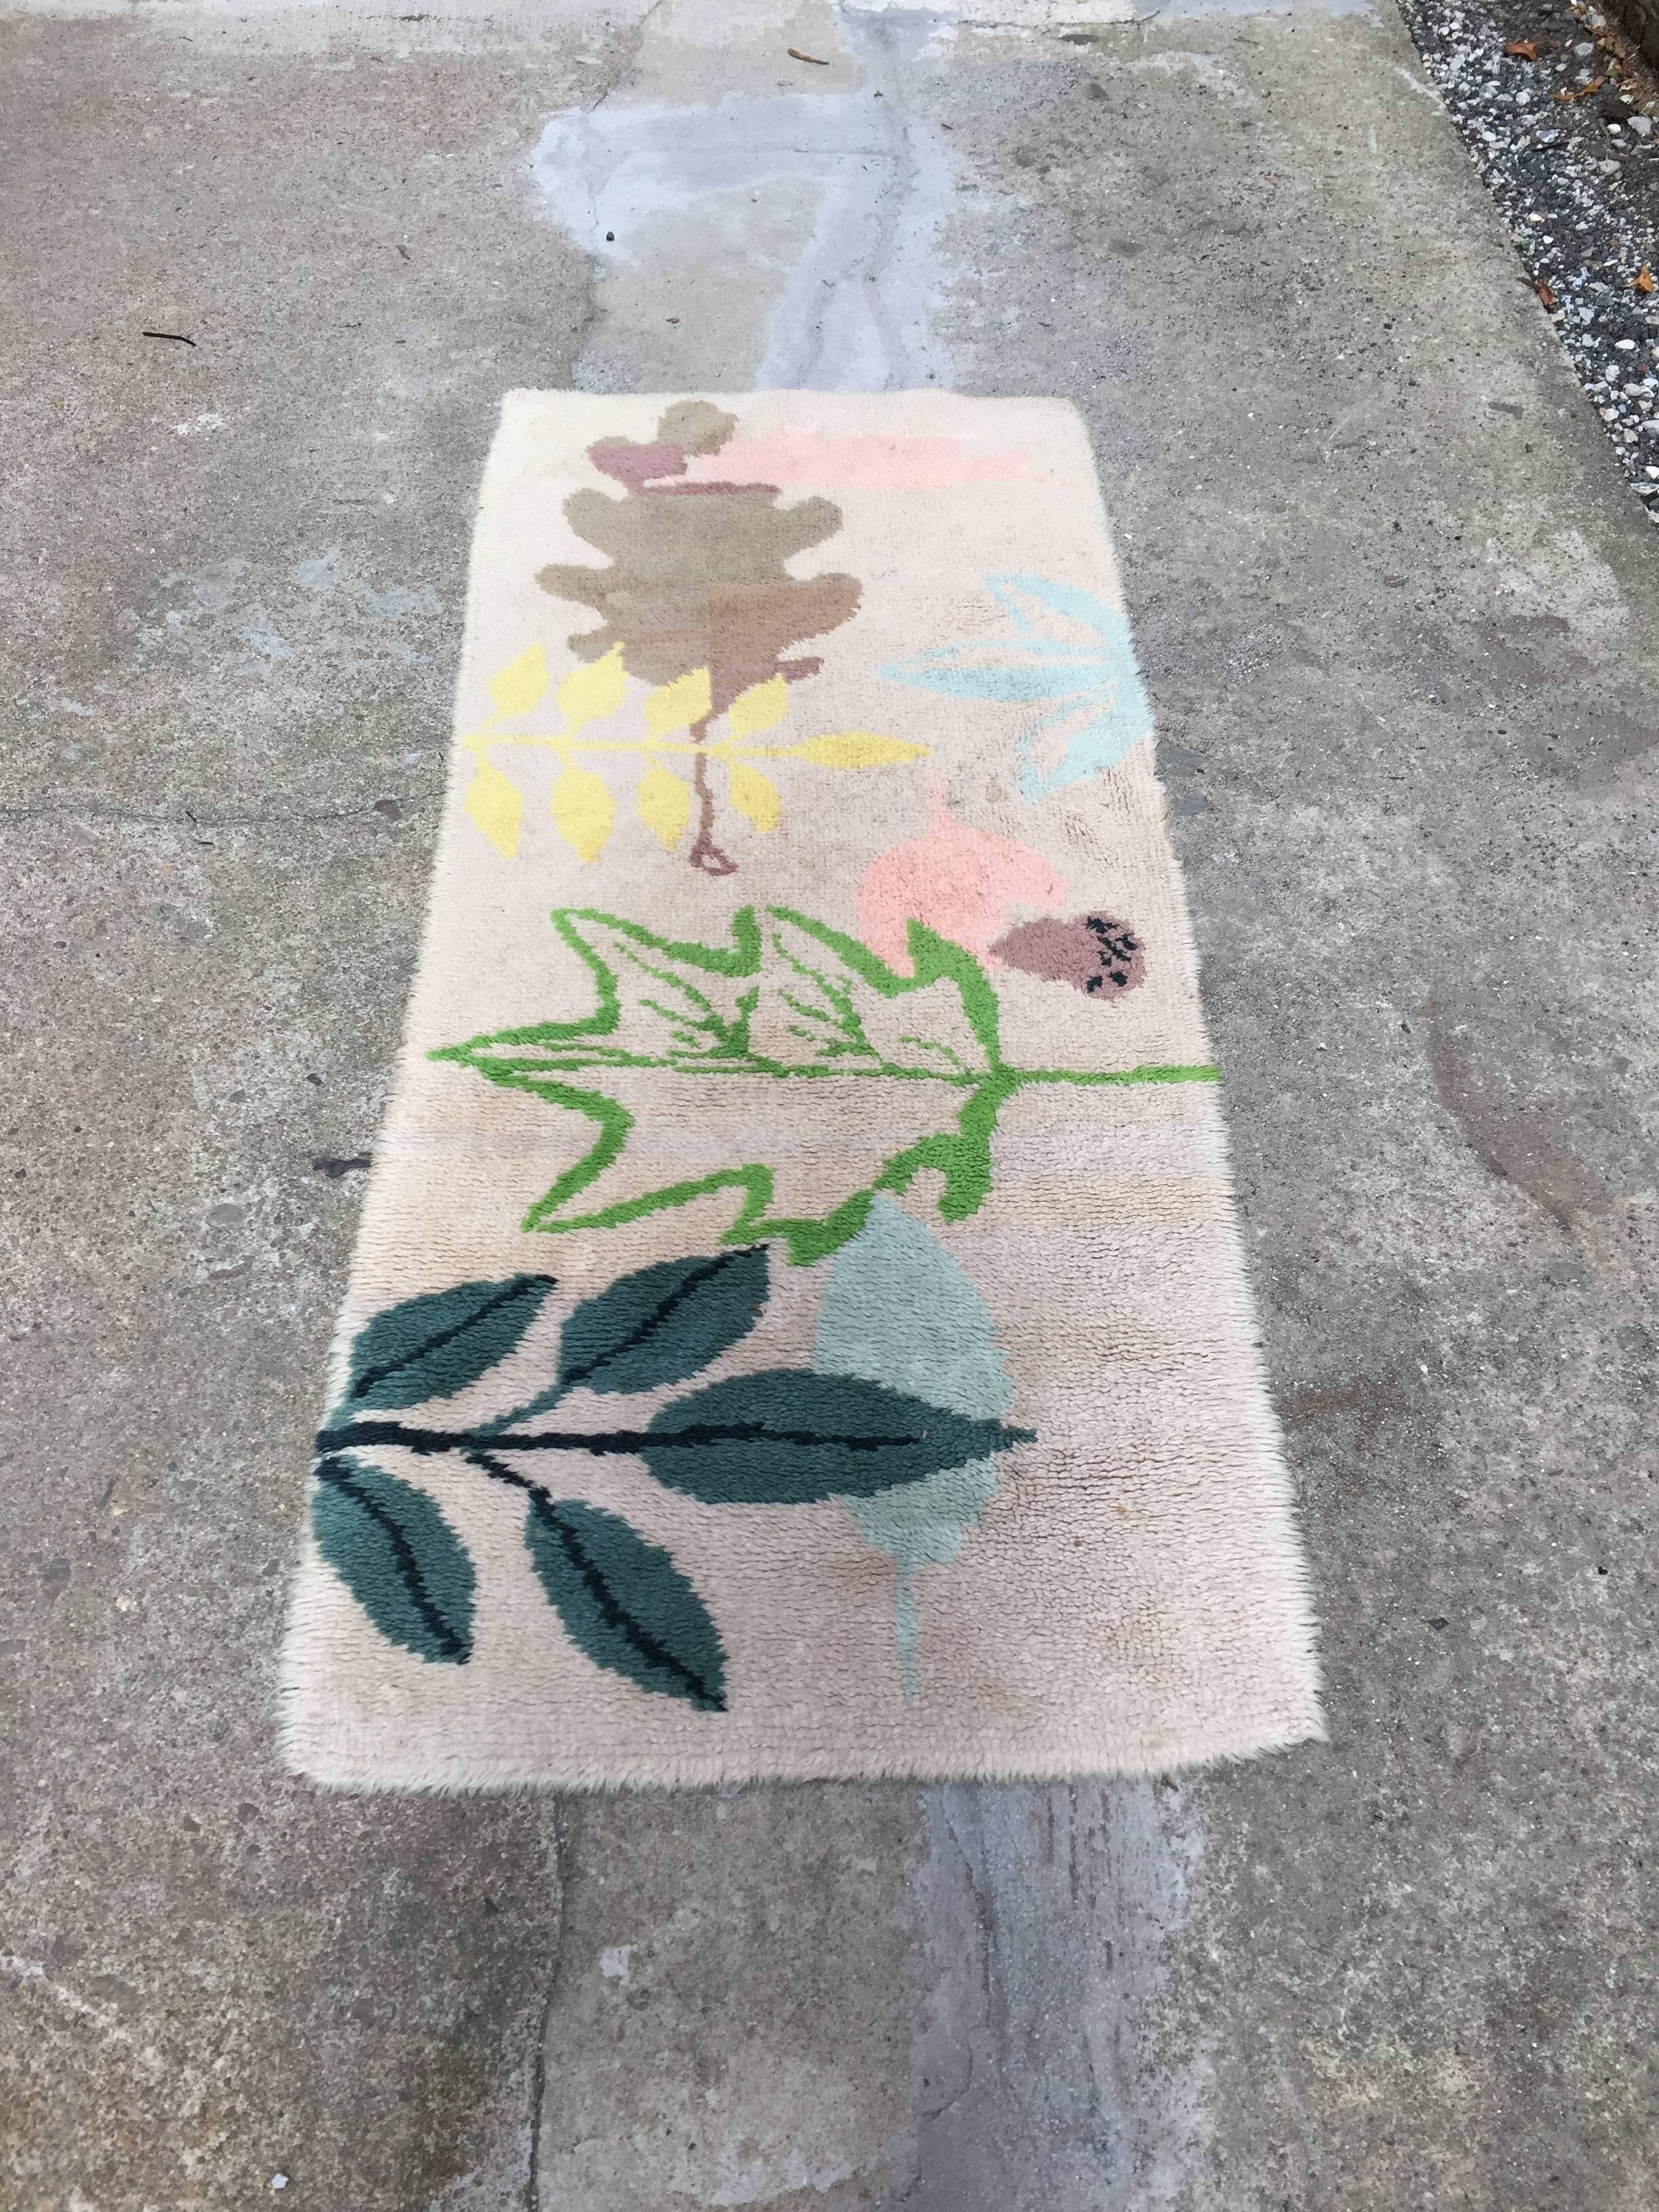 Beautiful modernist hook rug adorned with several species of tree flora. Cream color background with different tree leaves and an acorn. All handmade, circa 1950-1960.